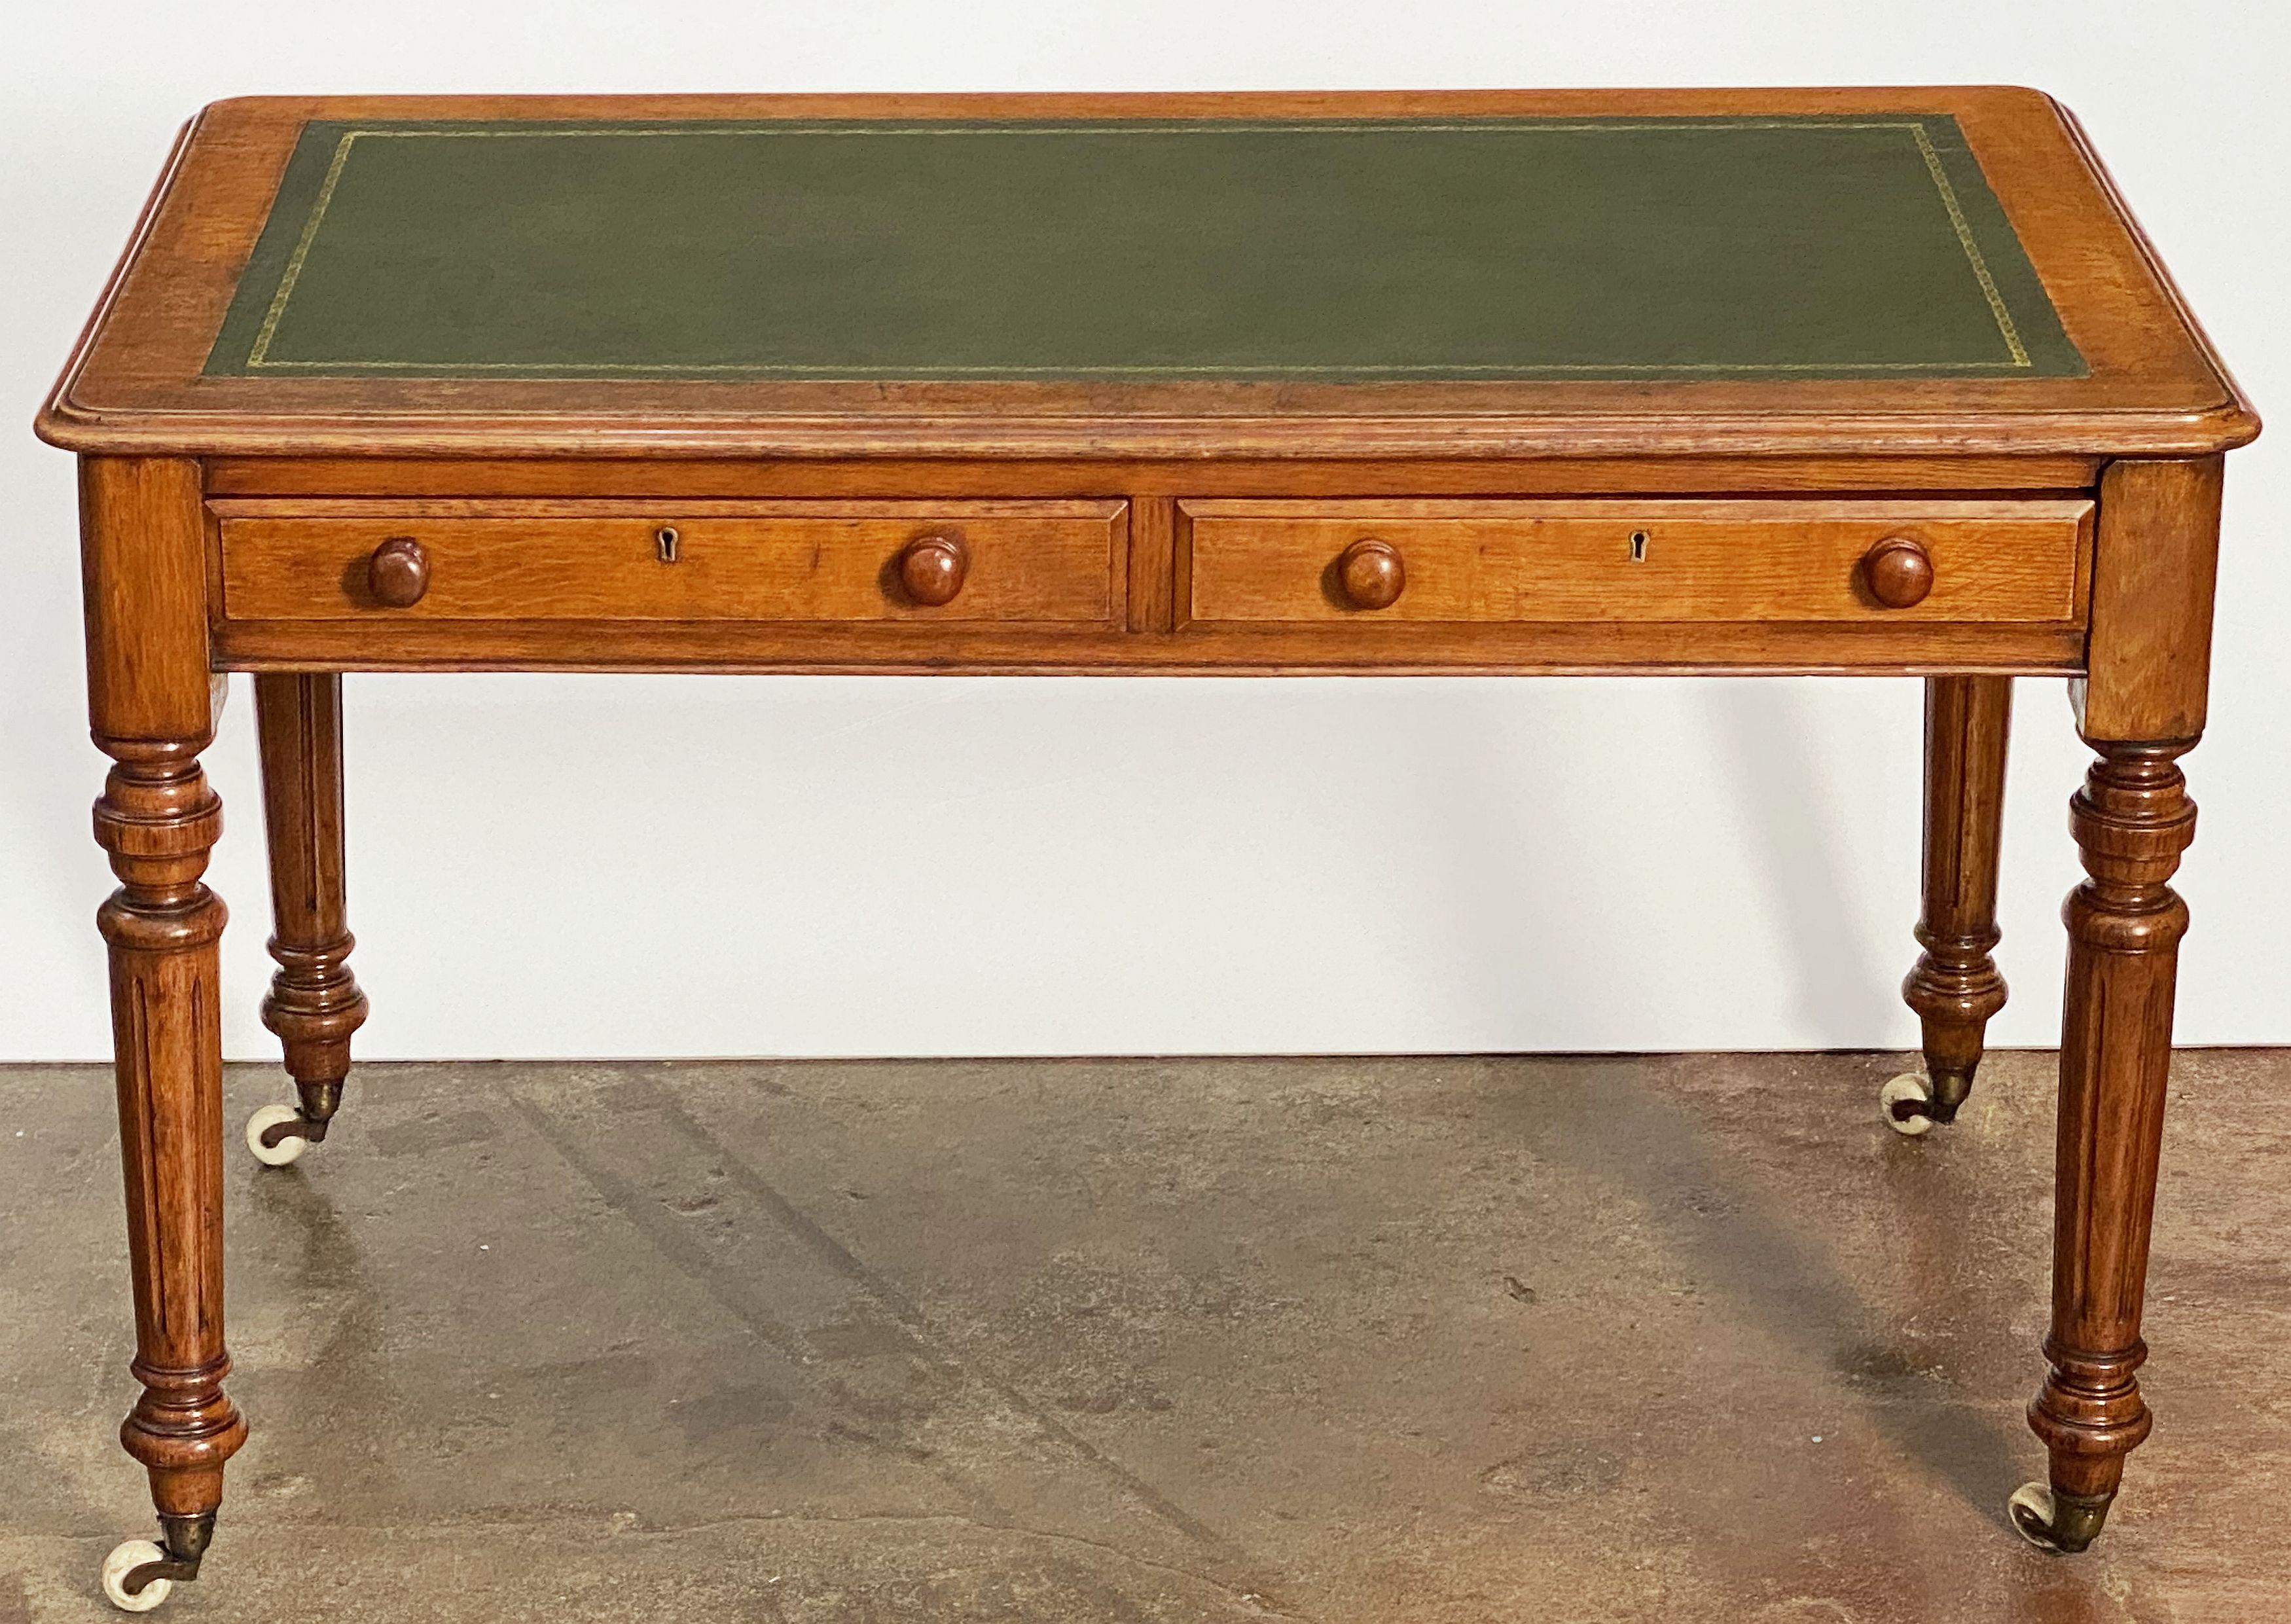 19th Century English Writing Desk or Table of Oak with Embossed Leather Top